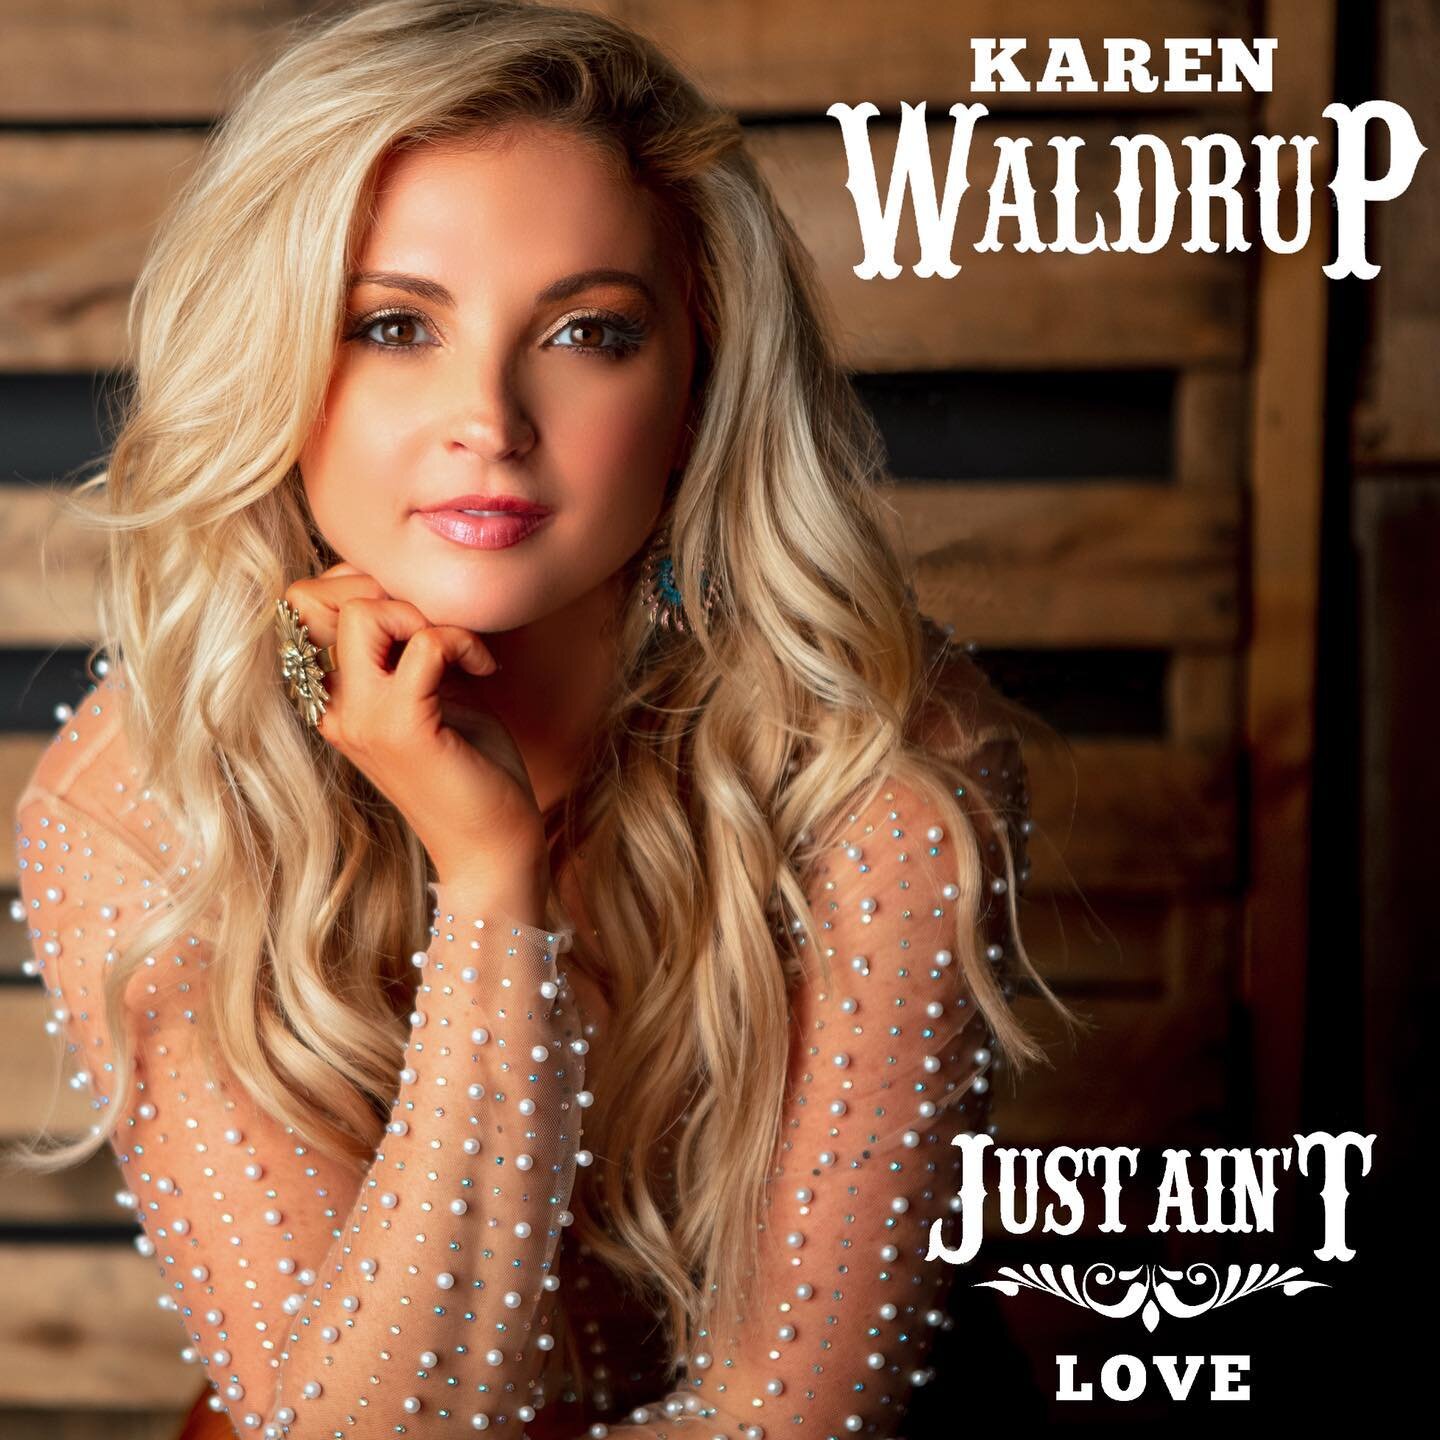 @karenwaldrupmusic&rsquo;s new single #justaintlove is out on 8/12! Produced by Grammy award winning producers Paul Worley &amp; Biff Watson! Link in bio for details!